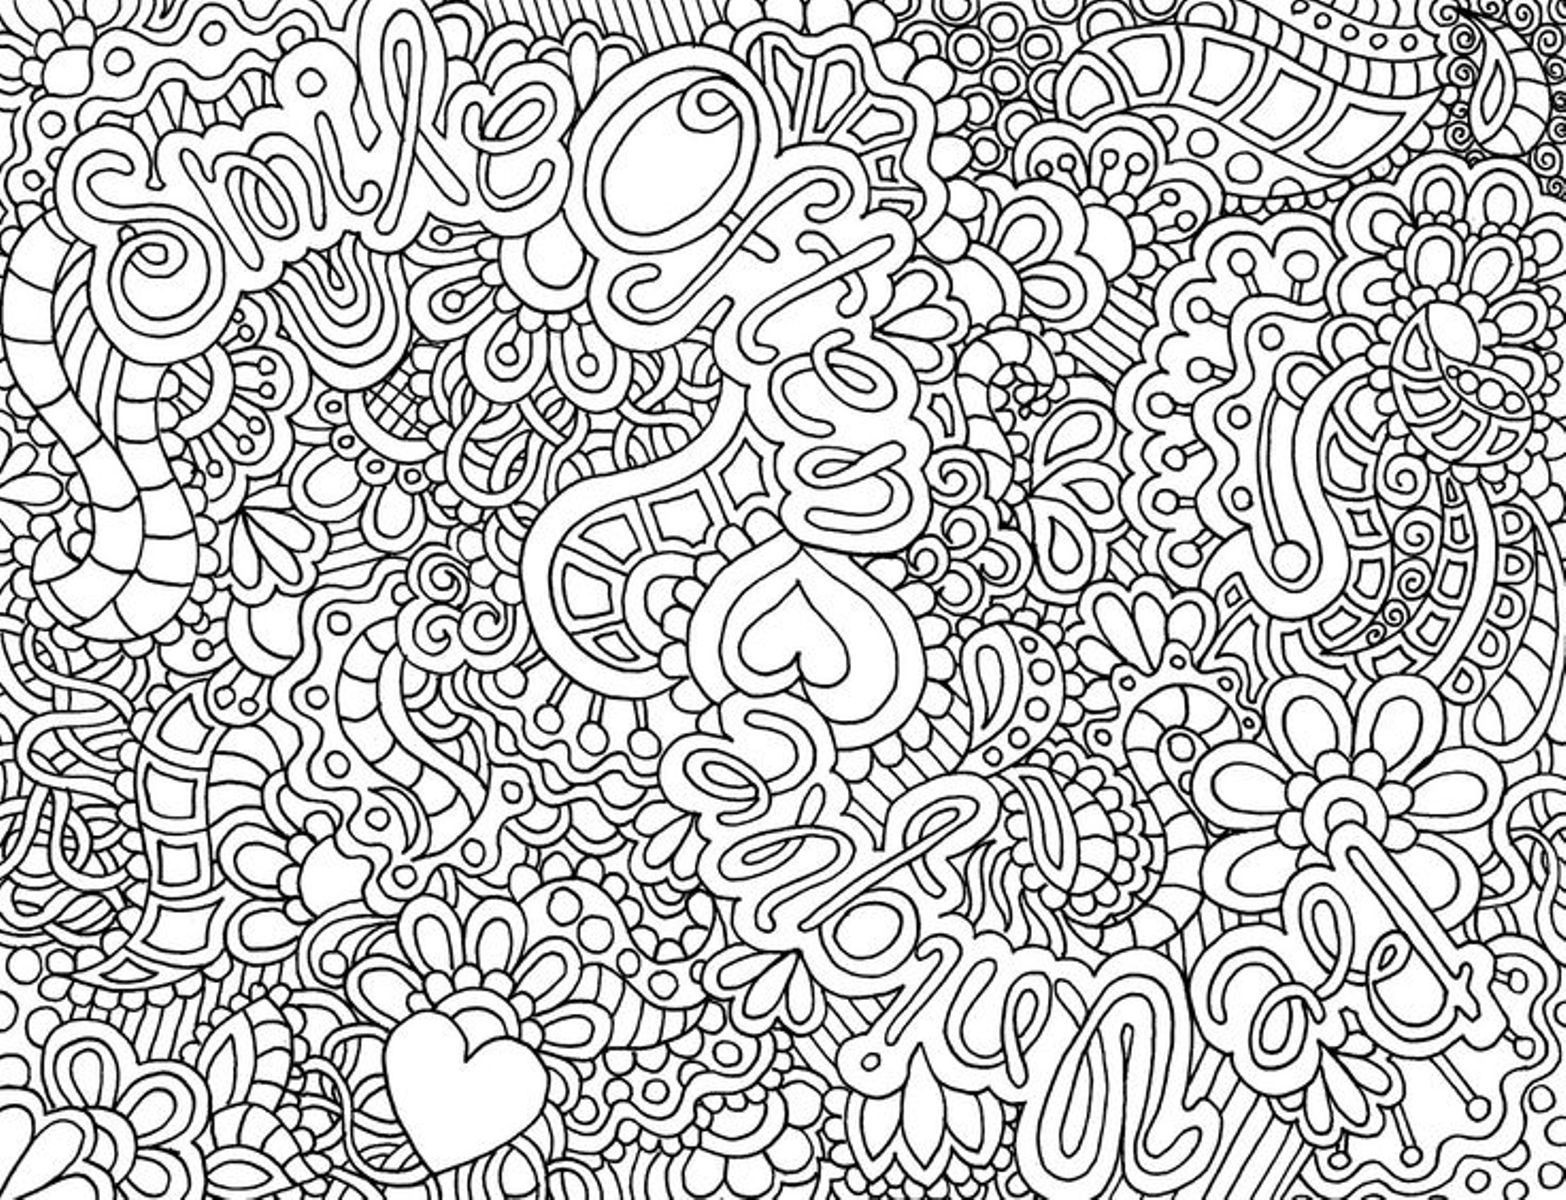 Printable Abstract Coloring Pages For Adults
 Printable Adult Coloring Pages Abstract AZ Coloring Pages